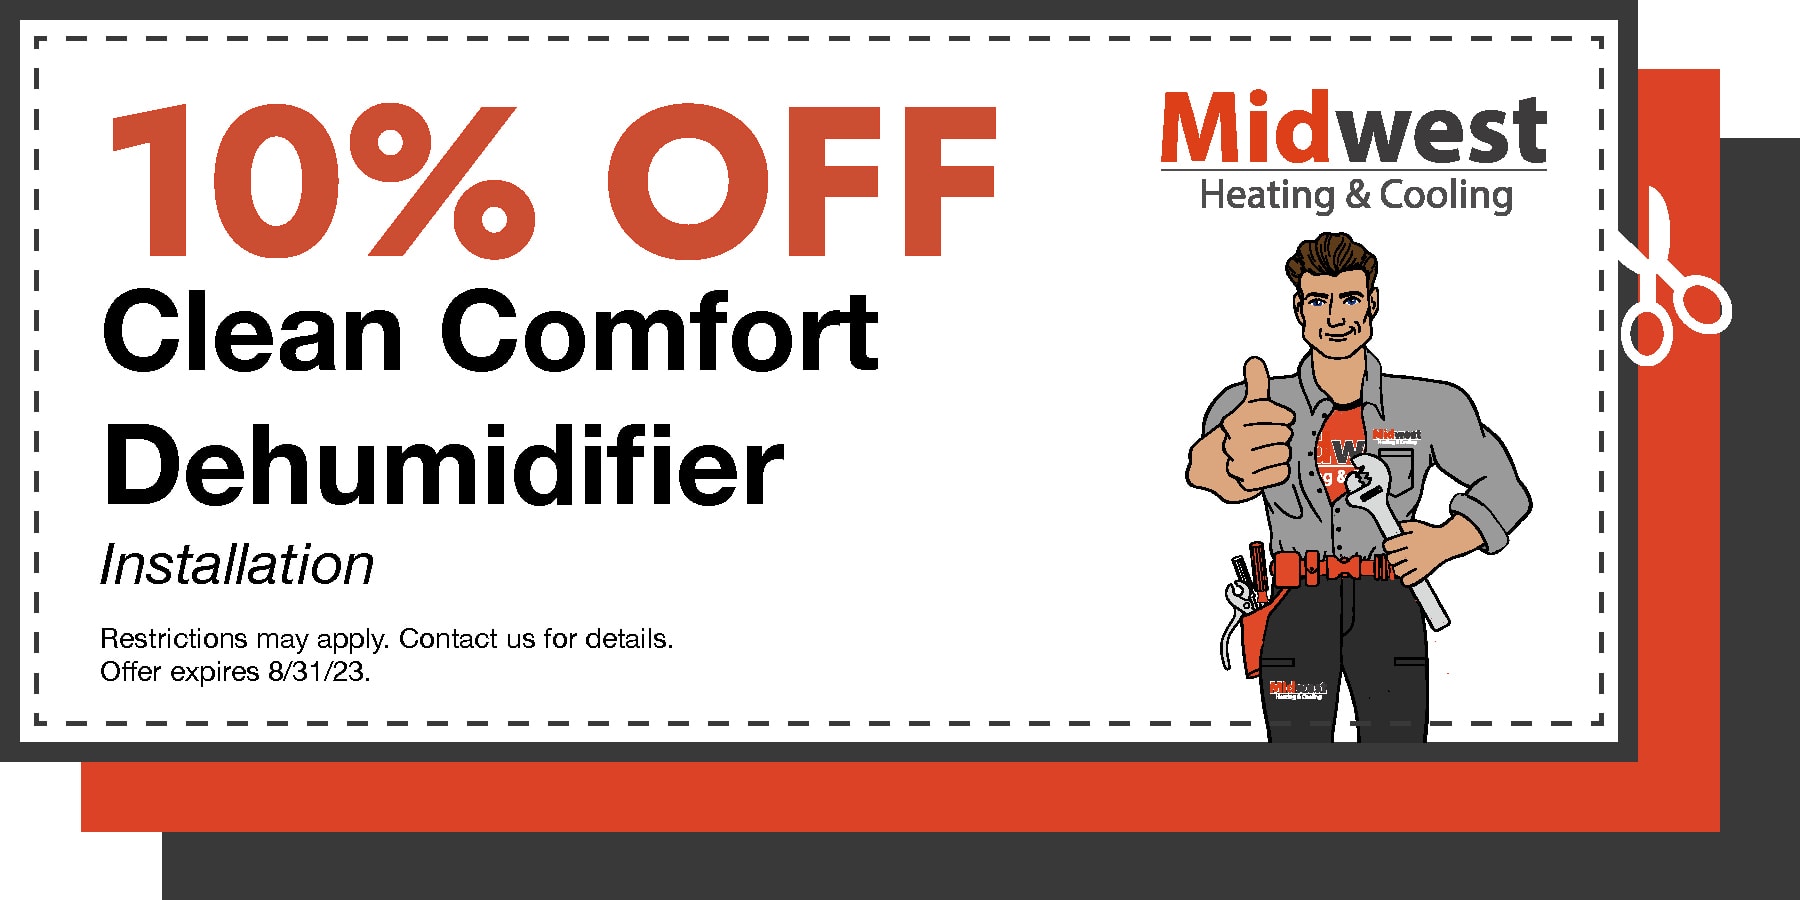 10% off clean comfort dehumidifier installation. restrictions may apply. Contact us for details.